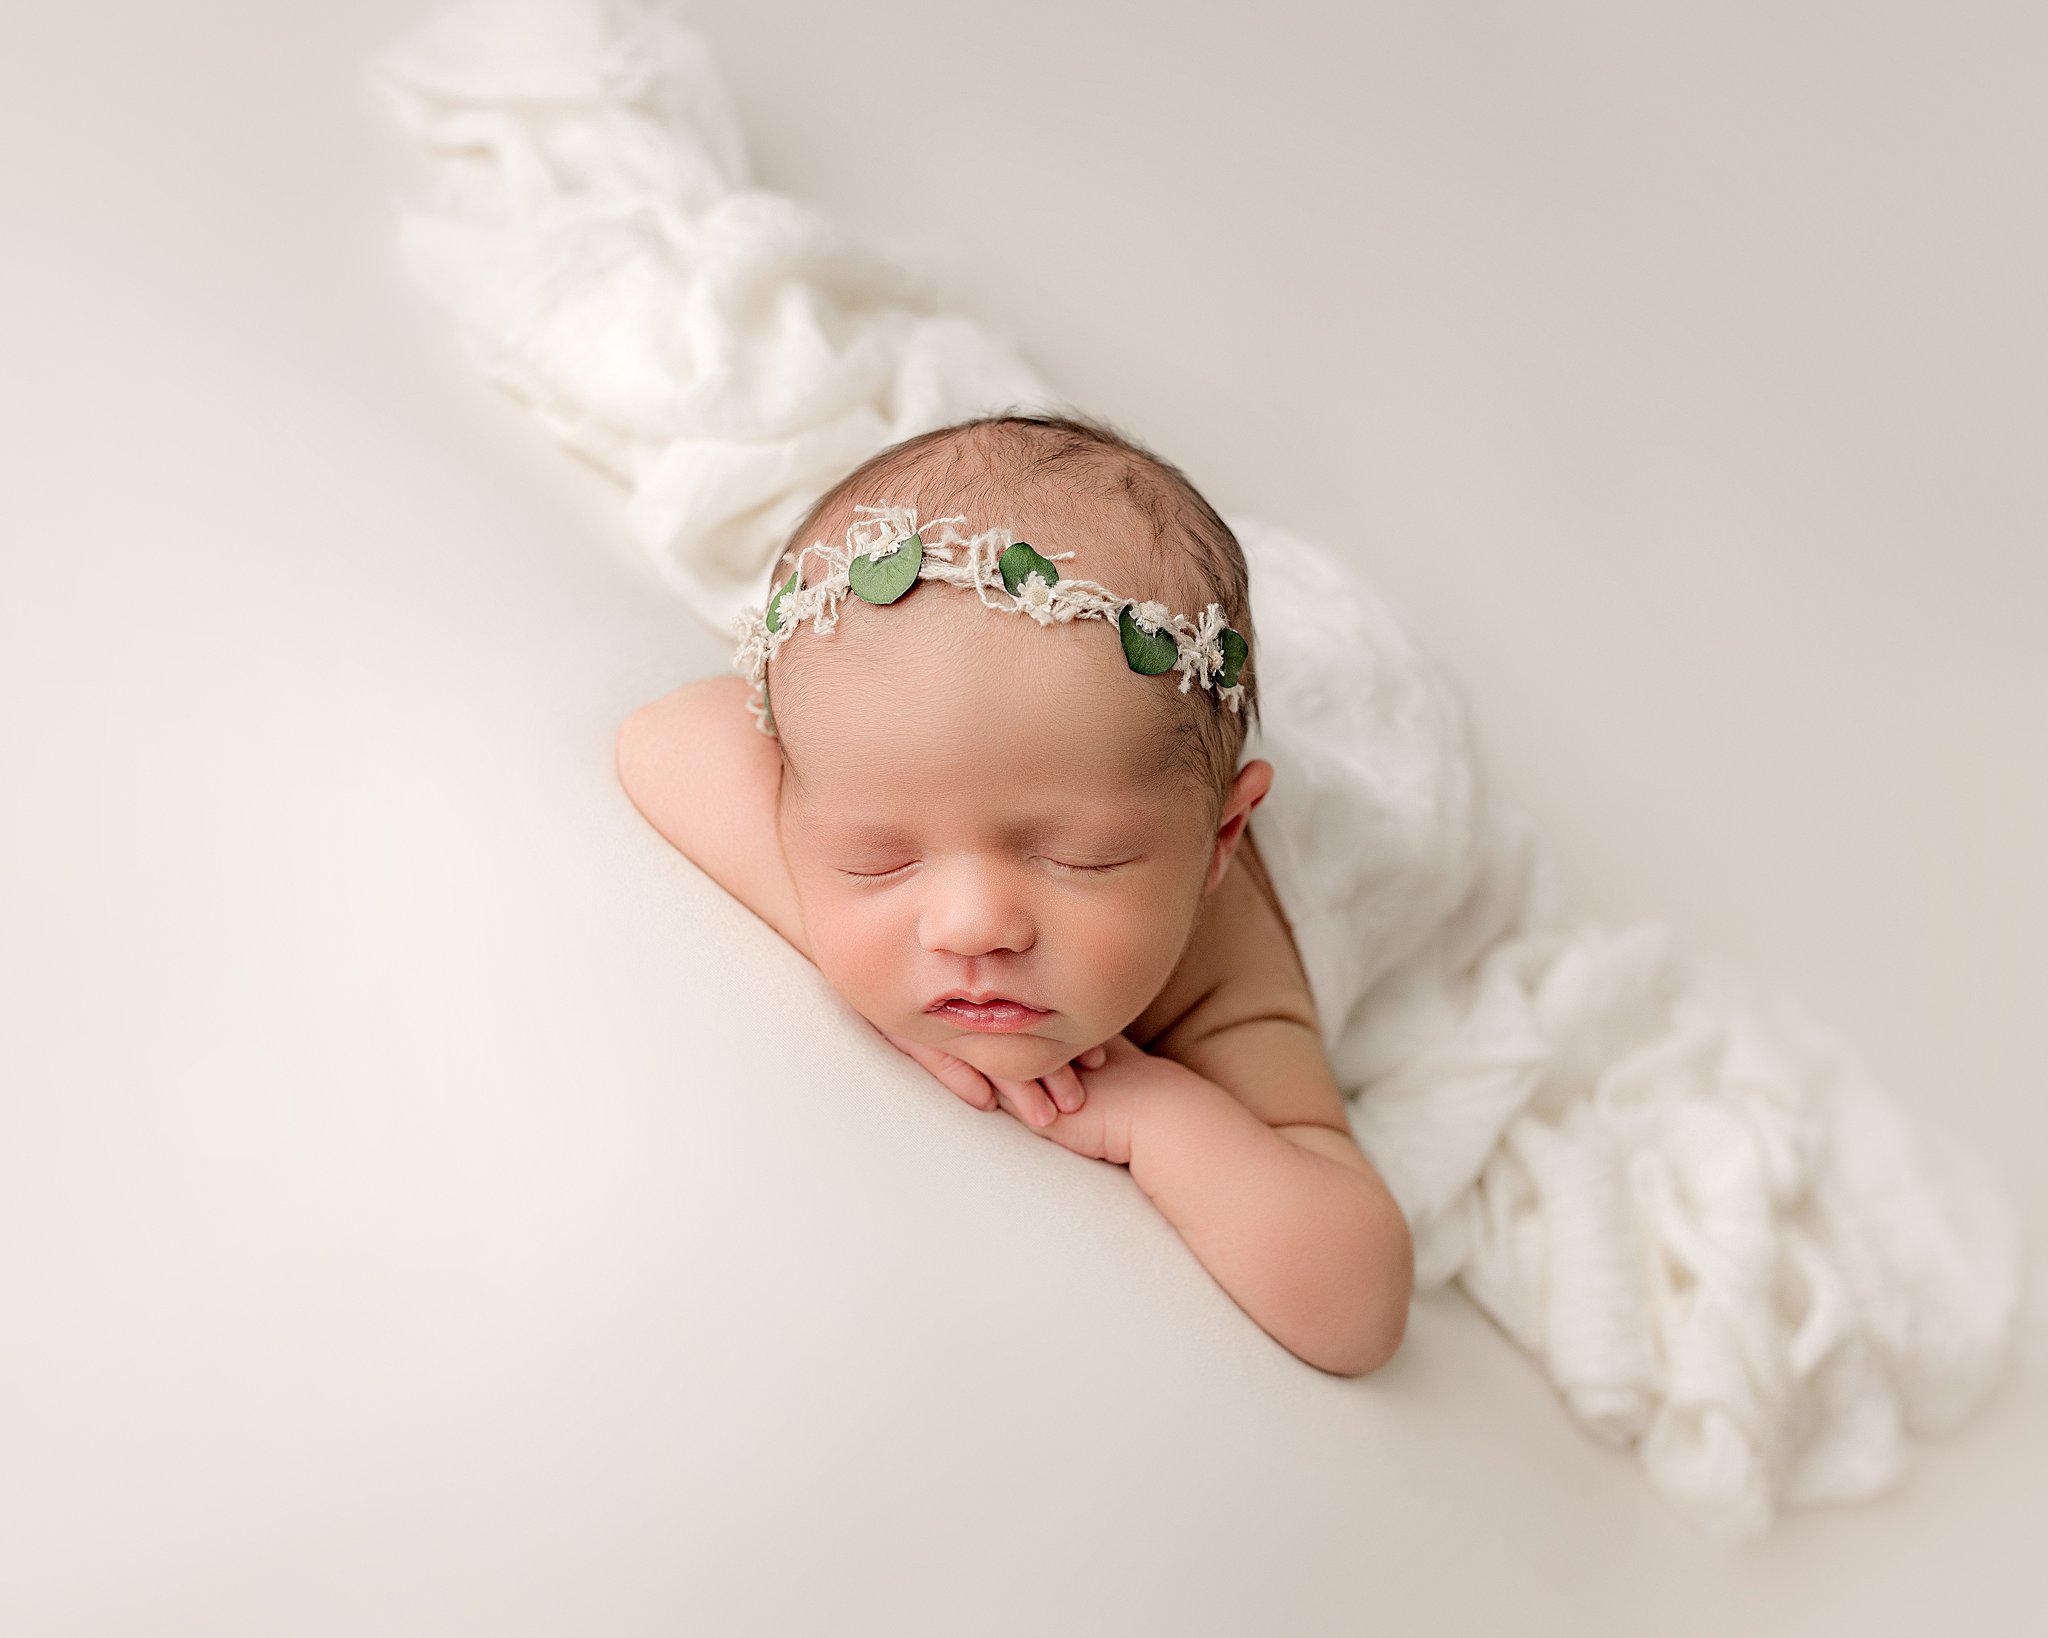 A newborn baby rests its head on its hands while sleeping on a white bed lowcountry baby boutique